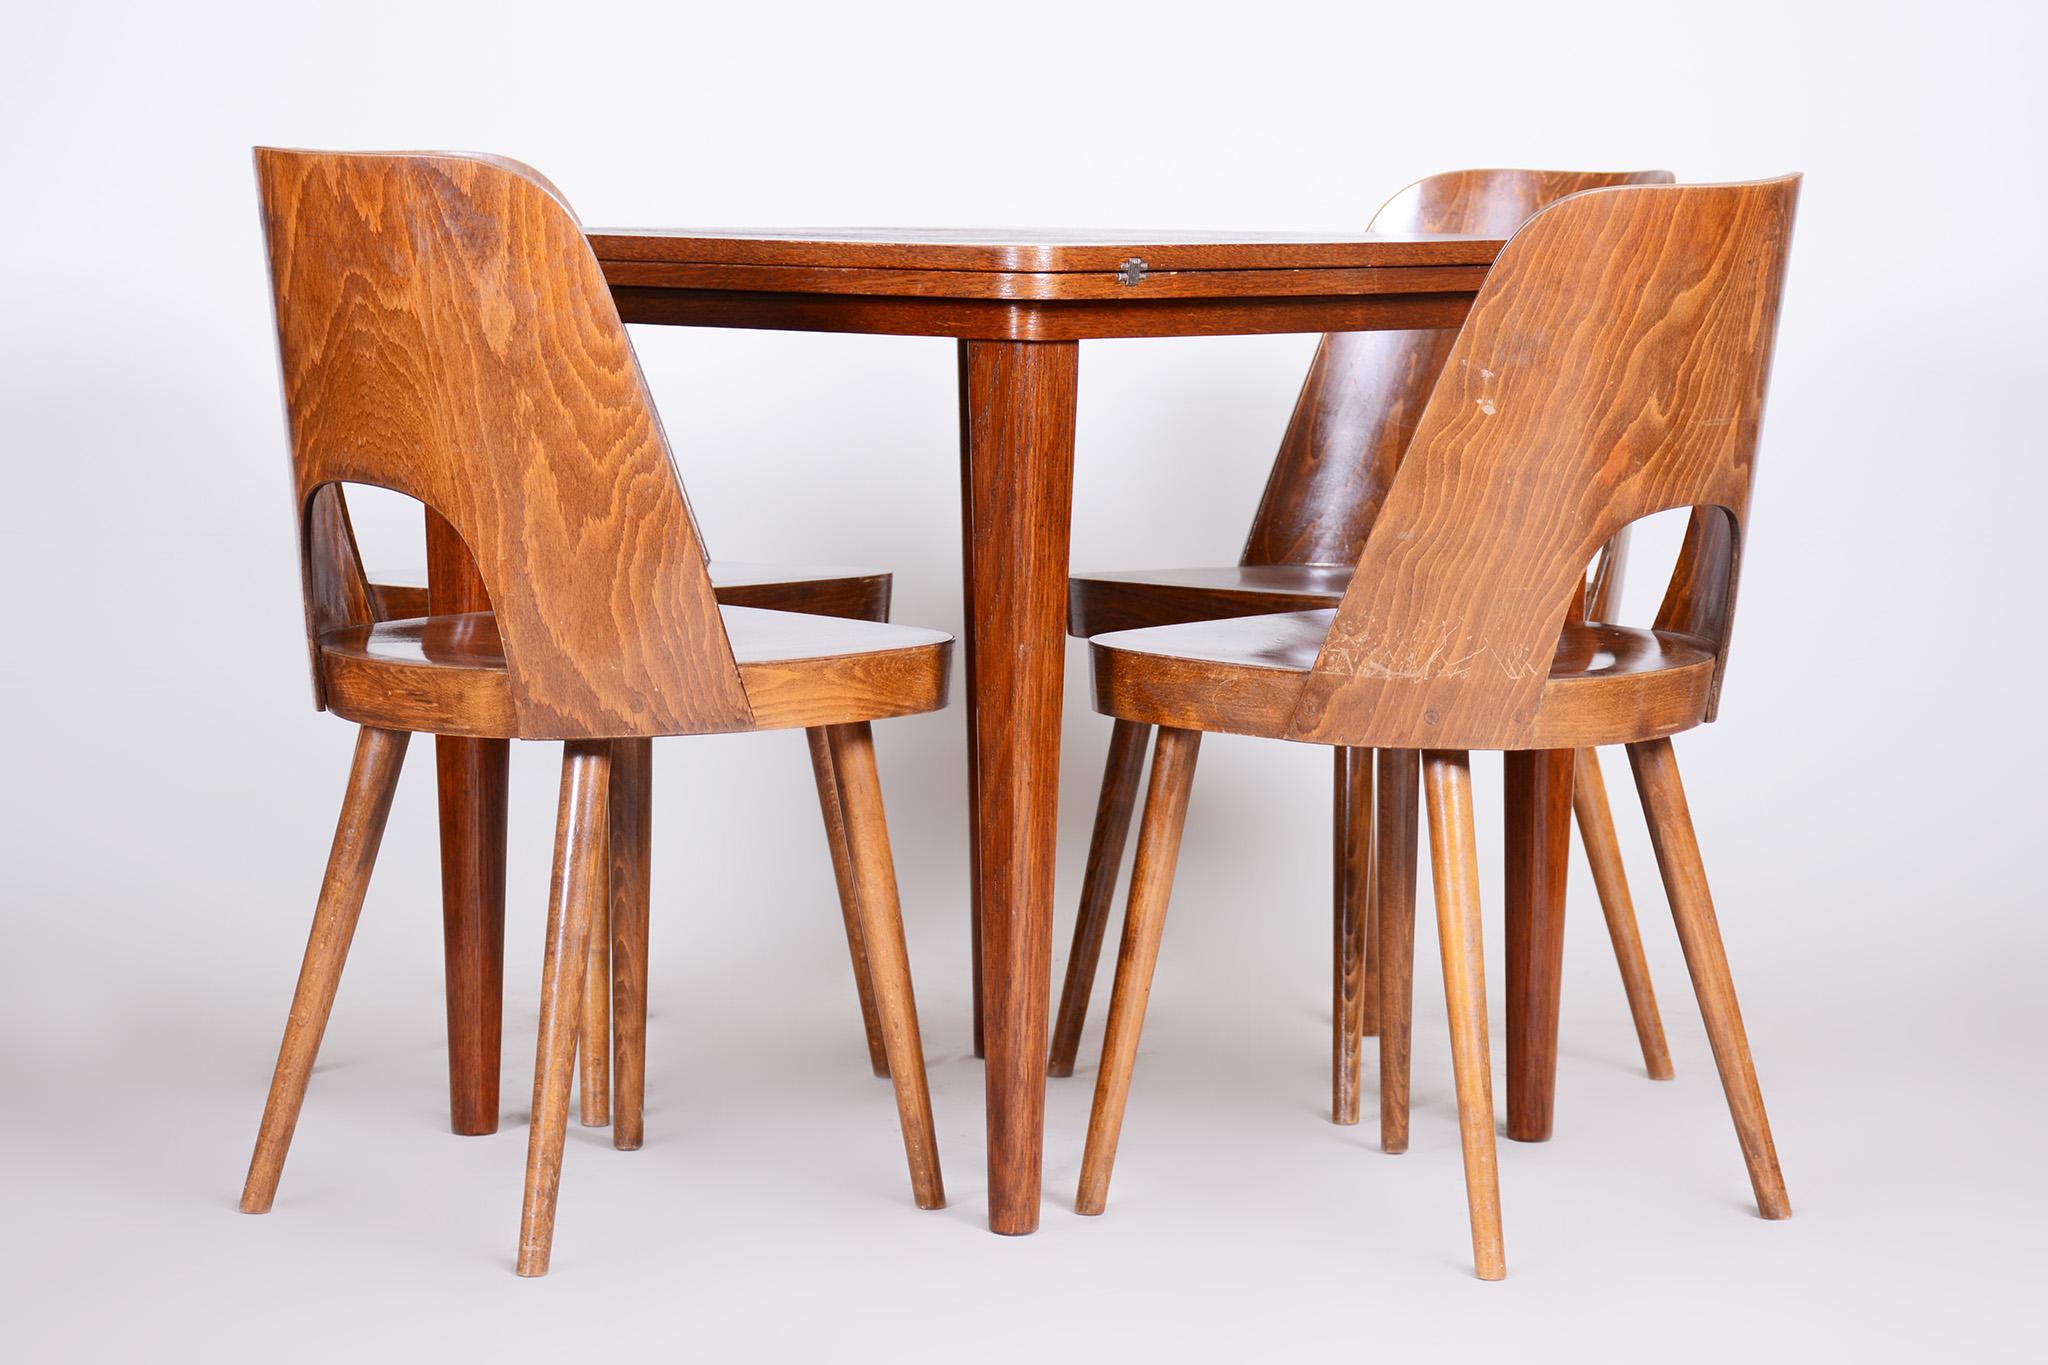 Small Folding Dining Table Made in 1940s Czechia, Designed by Halabala 10